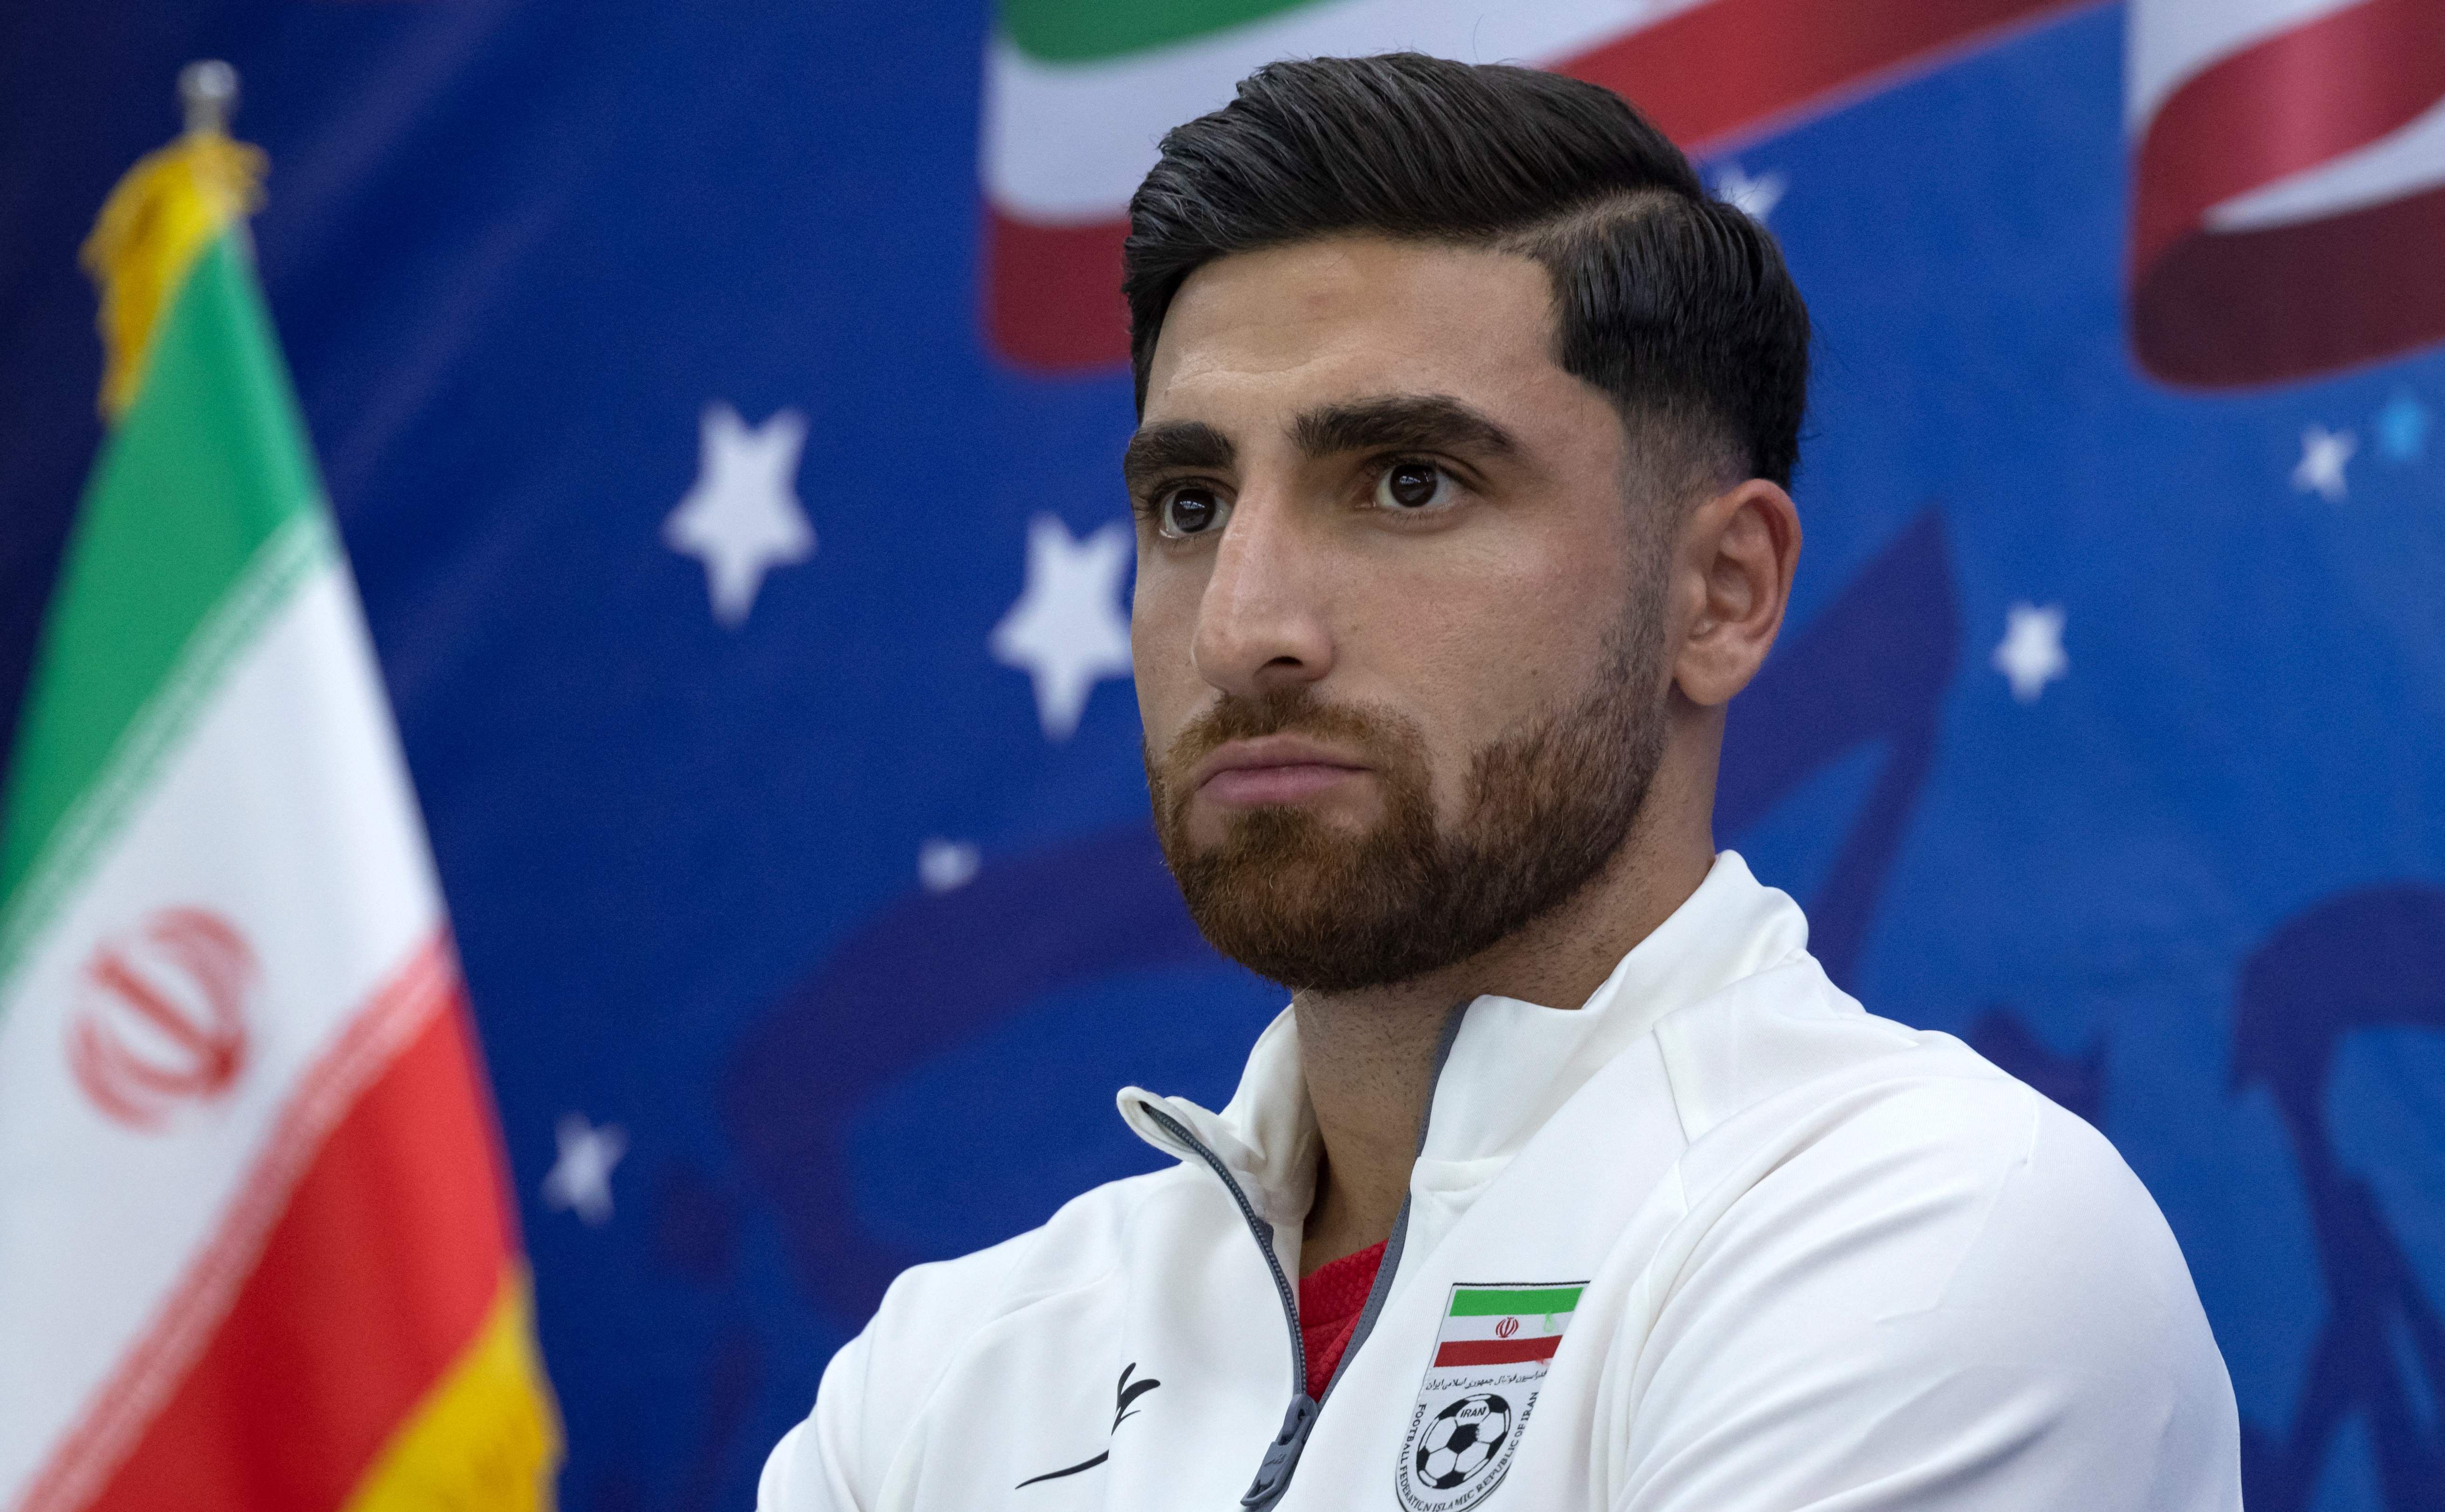 England are trying to disrupt Iran's preparations ahead of World Cup 2022 opener, claims player Alireza Jahanbakhsh | The Sun